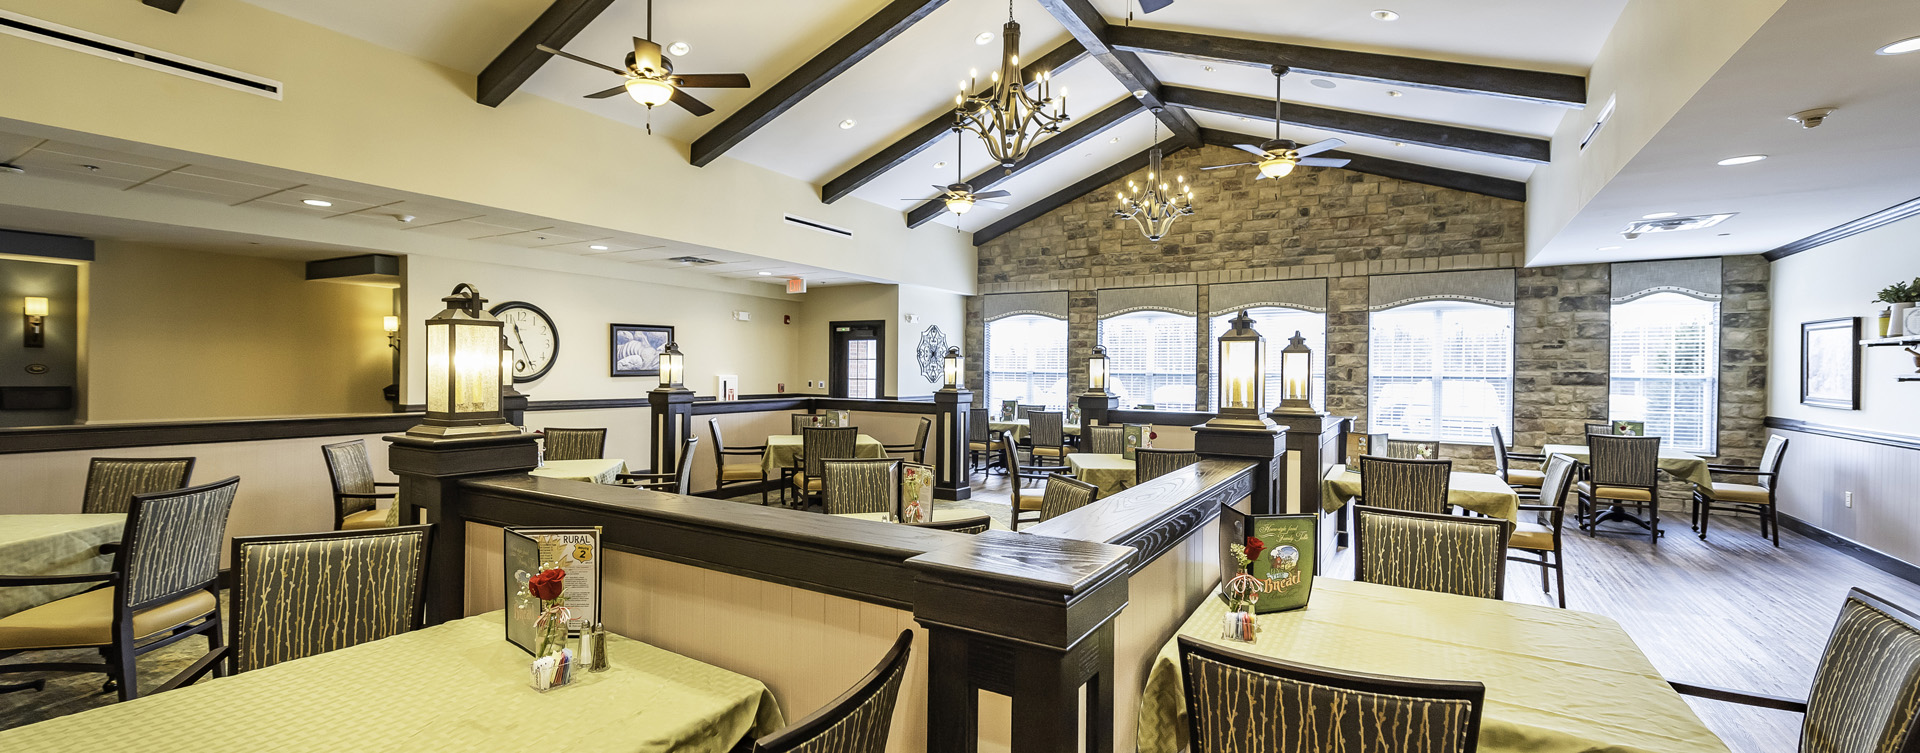 Enjoy homestyle food with made-from-scratch recipes in our dining room at Bickford of Canton